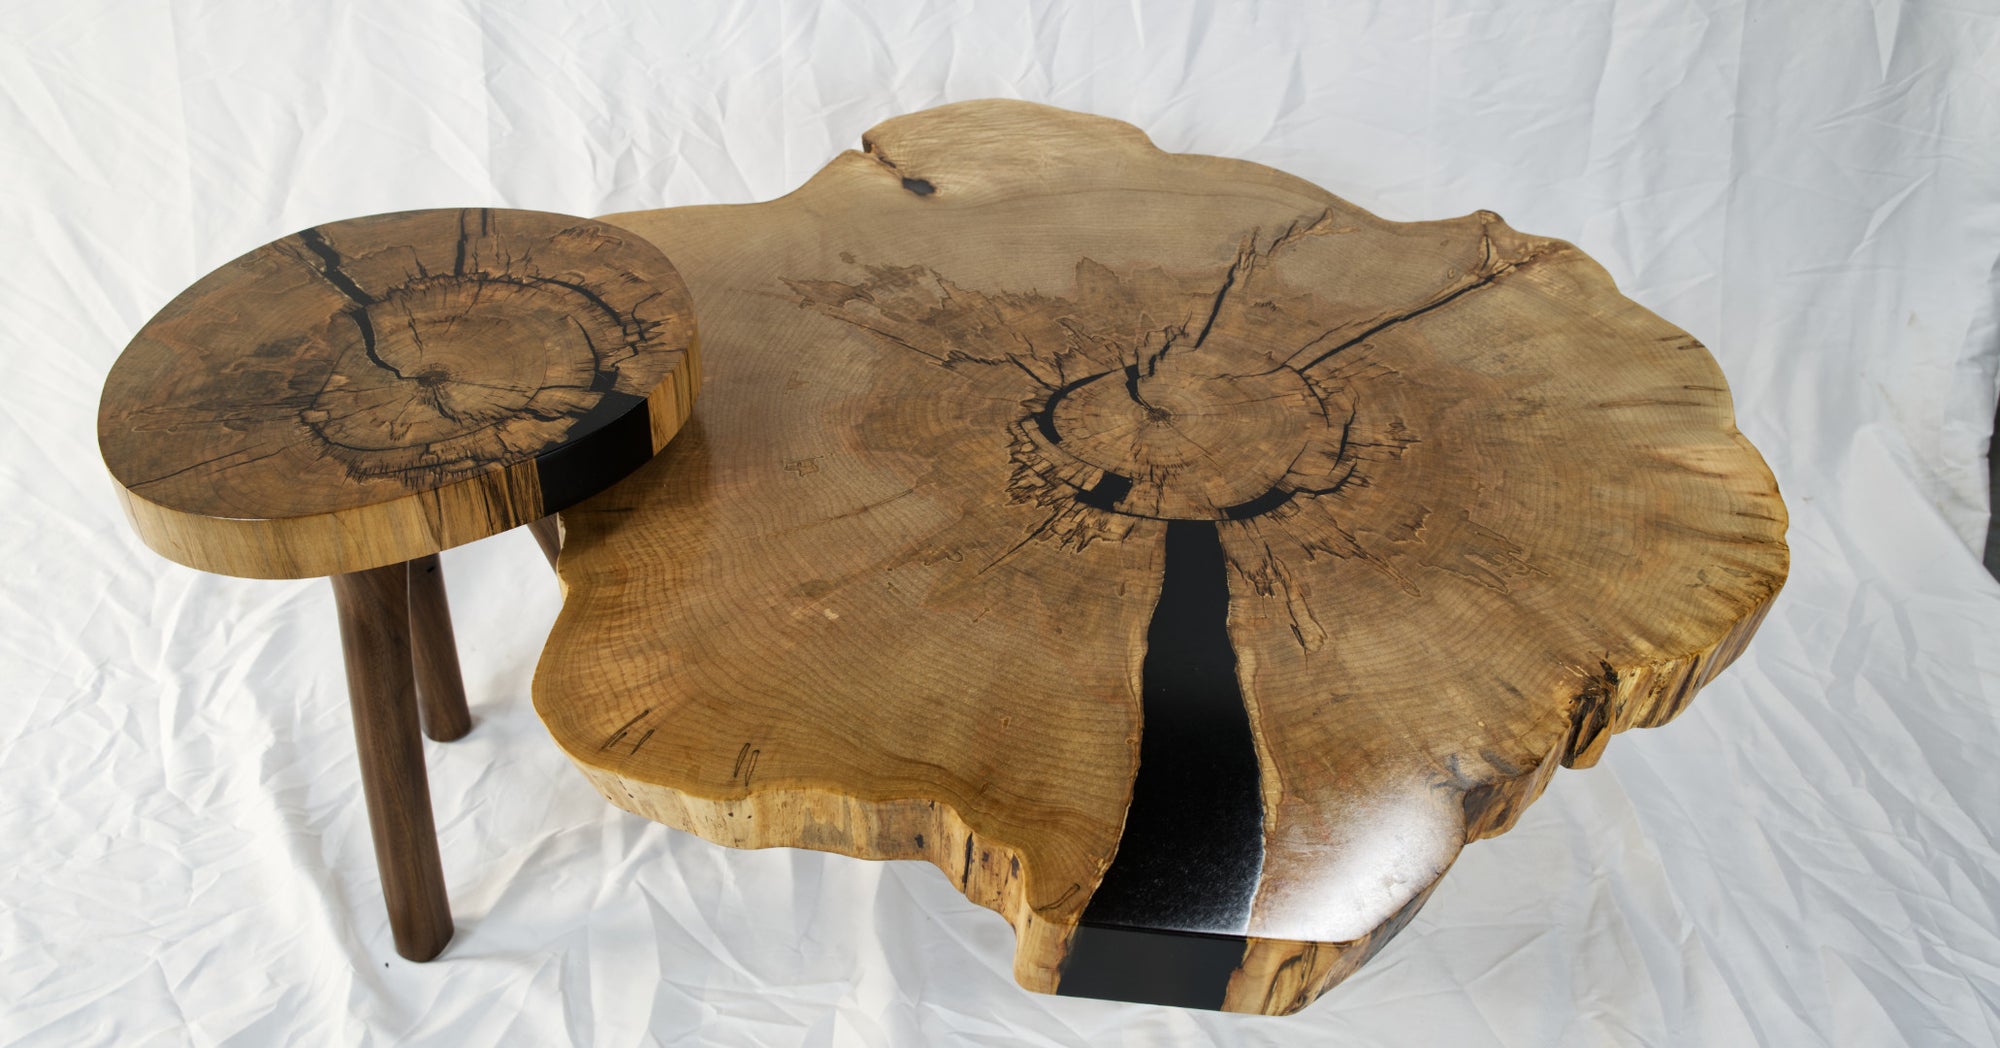 Silver maple cross section coffee table with matching nesting table. Lightwood Designs, custom woodworking, home décor, office décor, gift, wedding gift, anniversary gift, custom engraving, Elora, Ontario, Handmade, Local